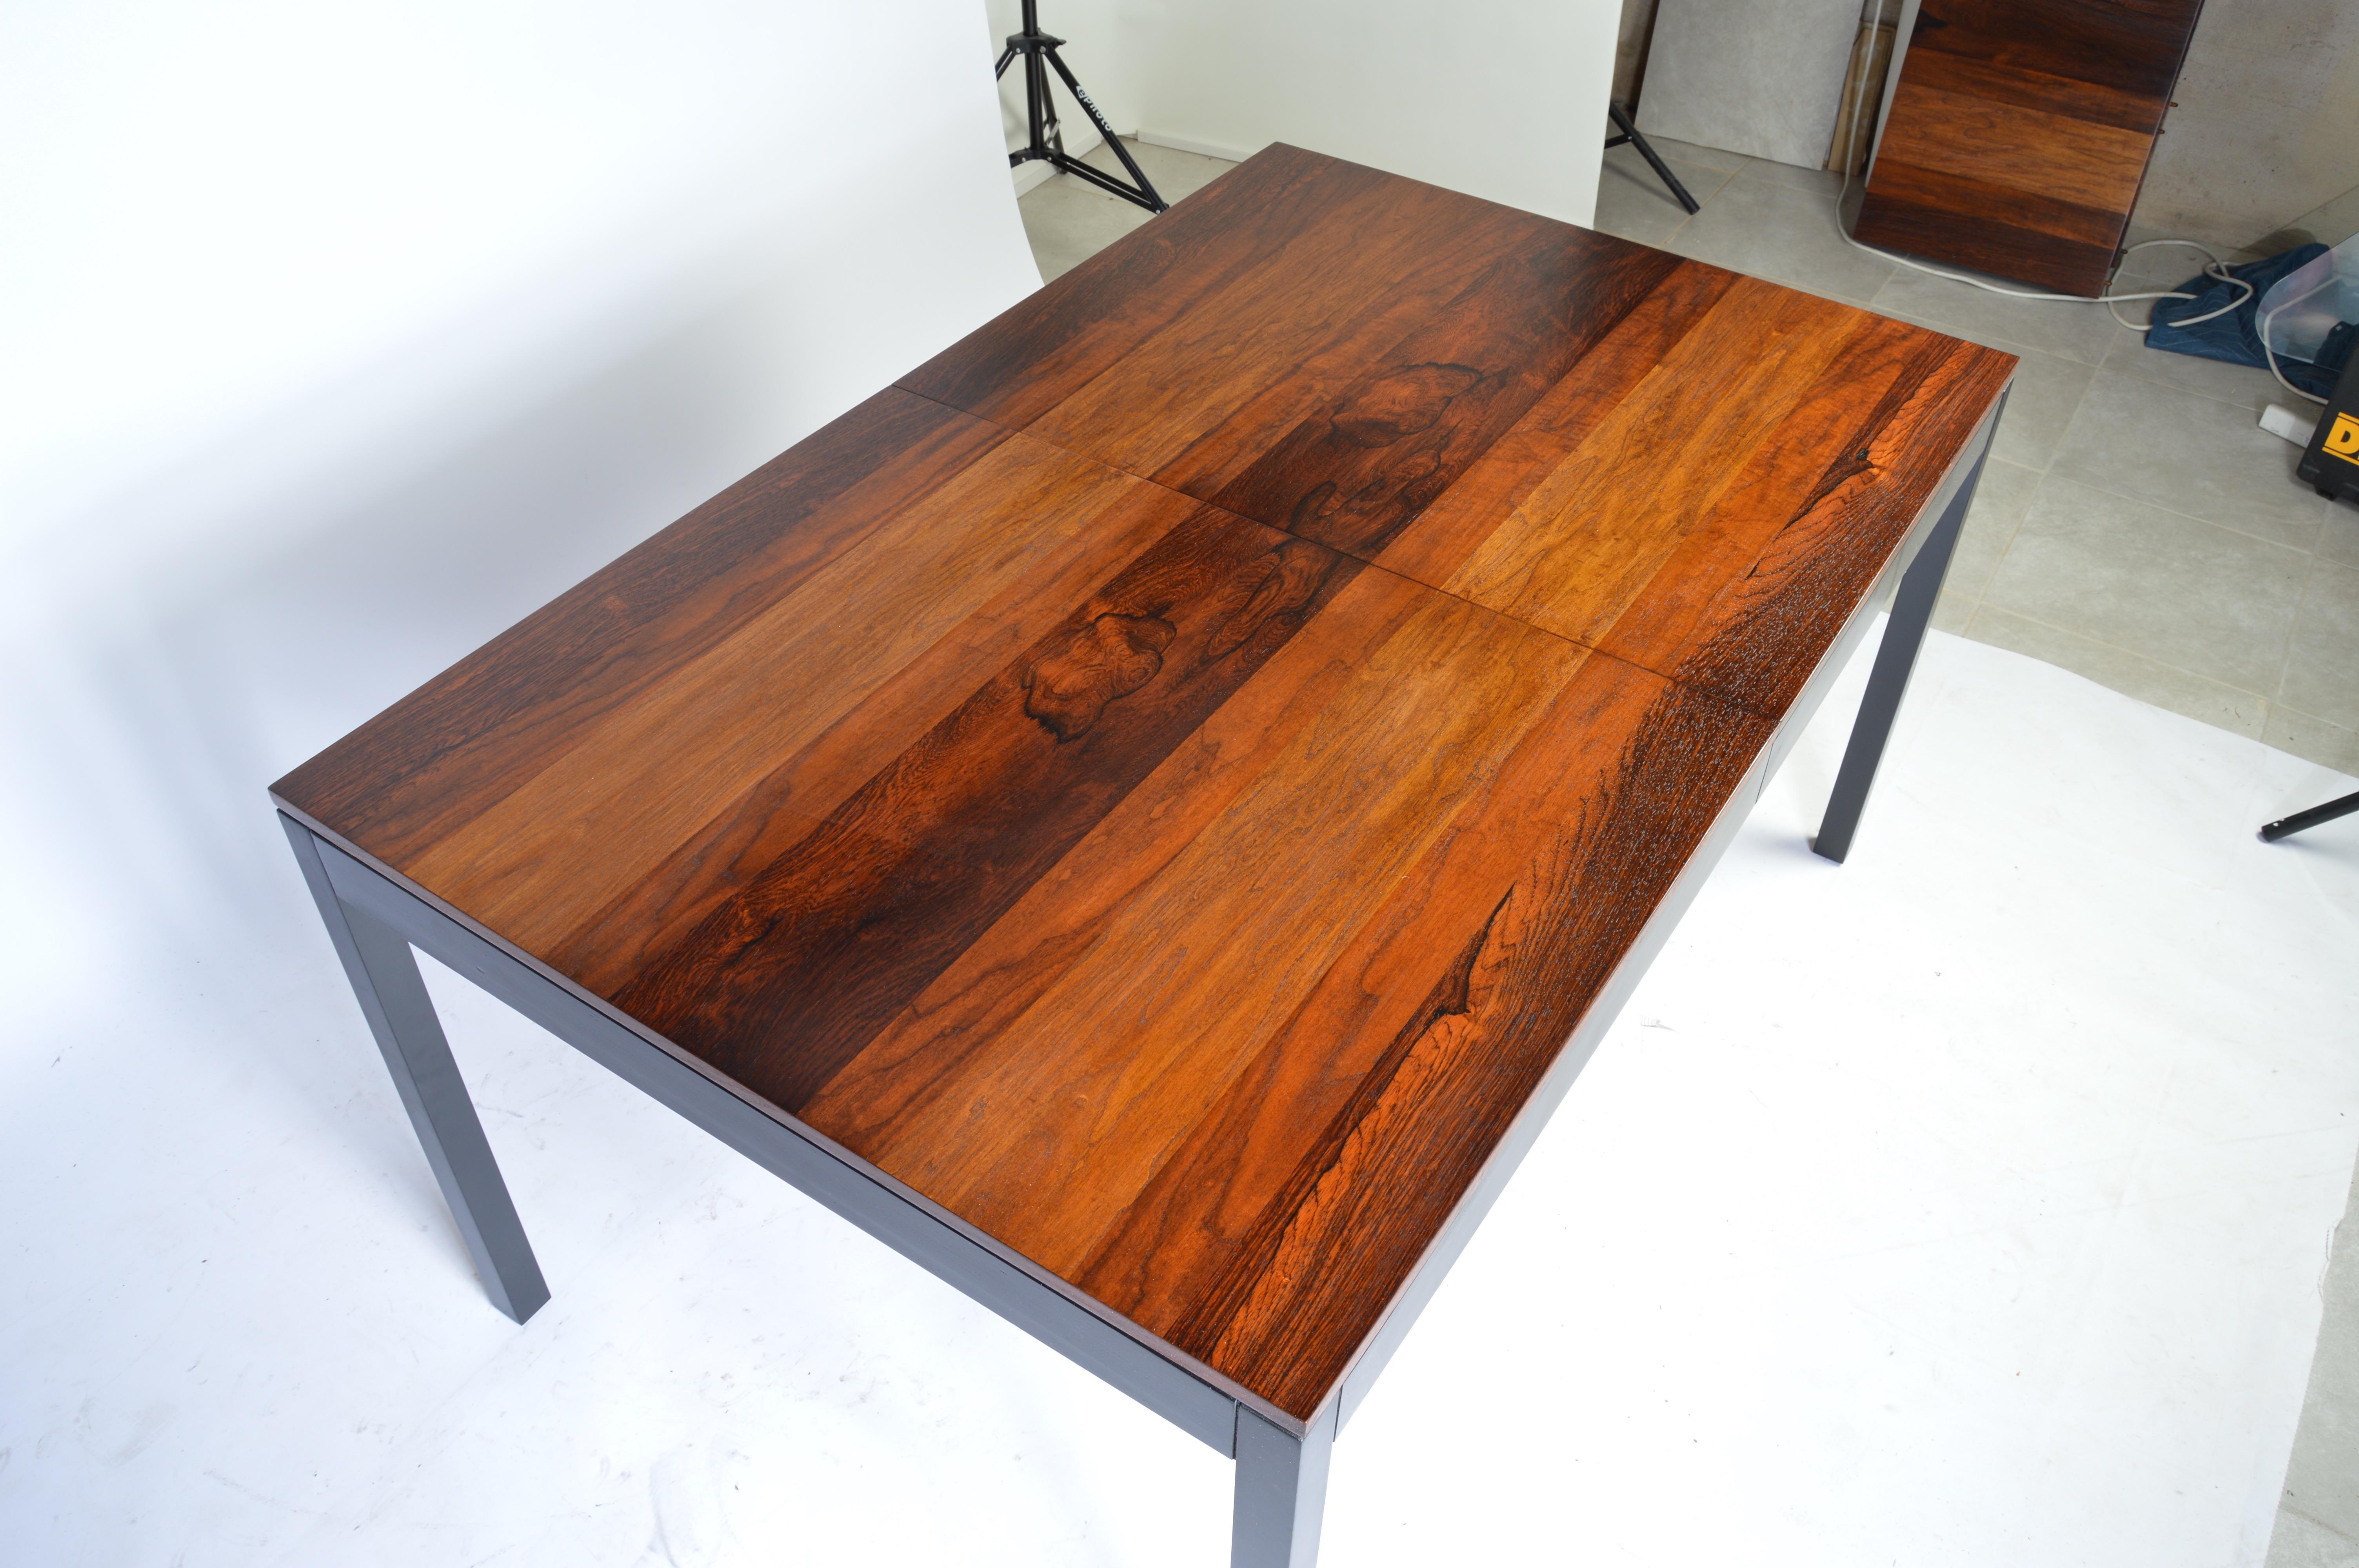 An expandable dining table designed by Milo Baughman for Directional having a blend of rosewood, walnut and ash woods. The top consists of solid planks. The legs and frame are solid wood as well. 
 Length without leaves inserted is 72